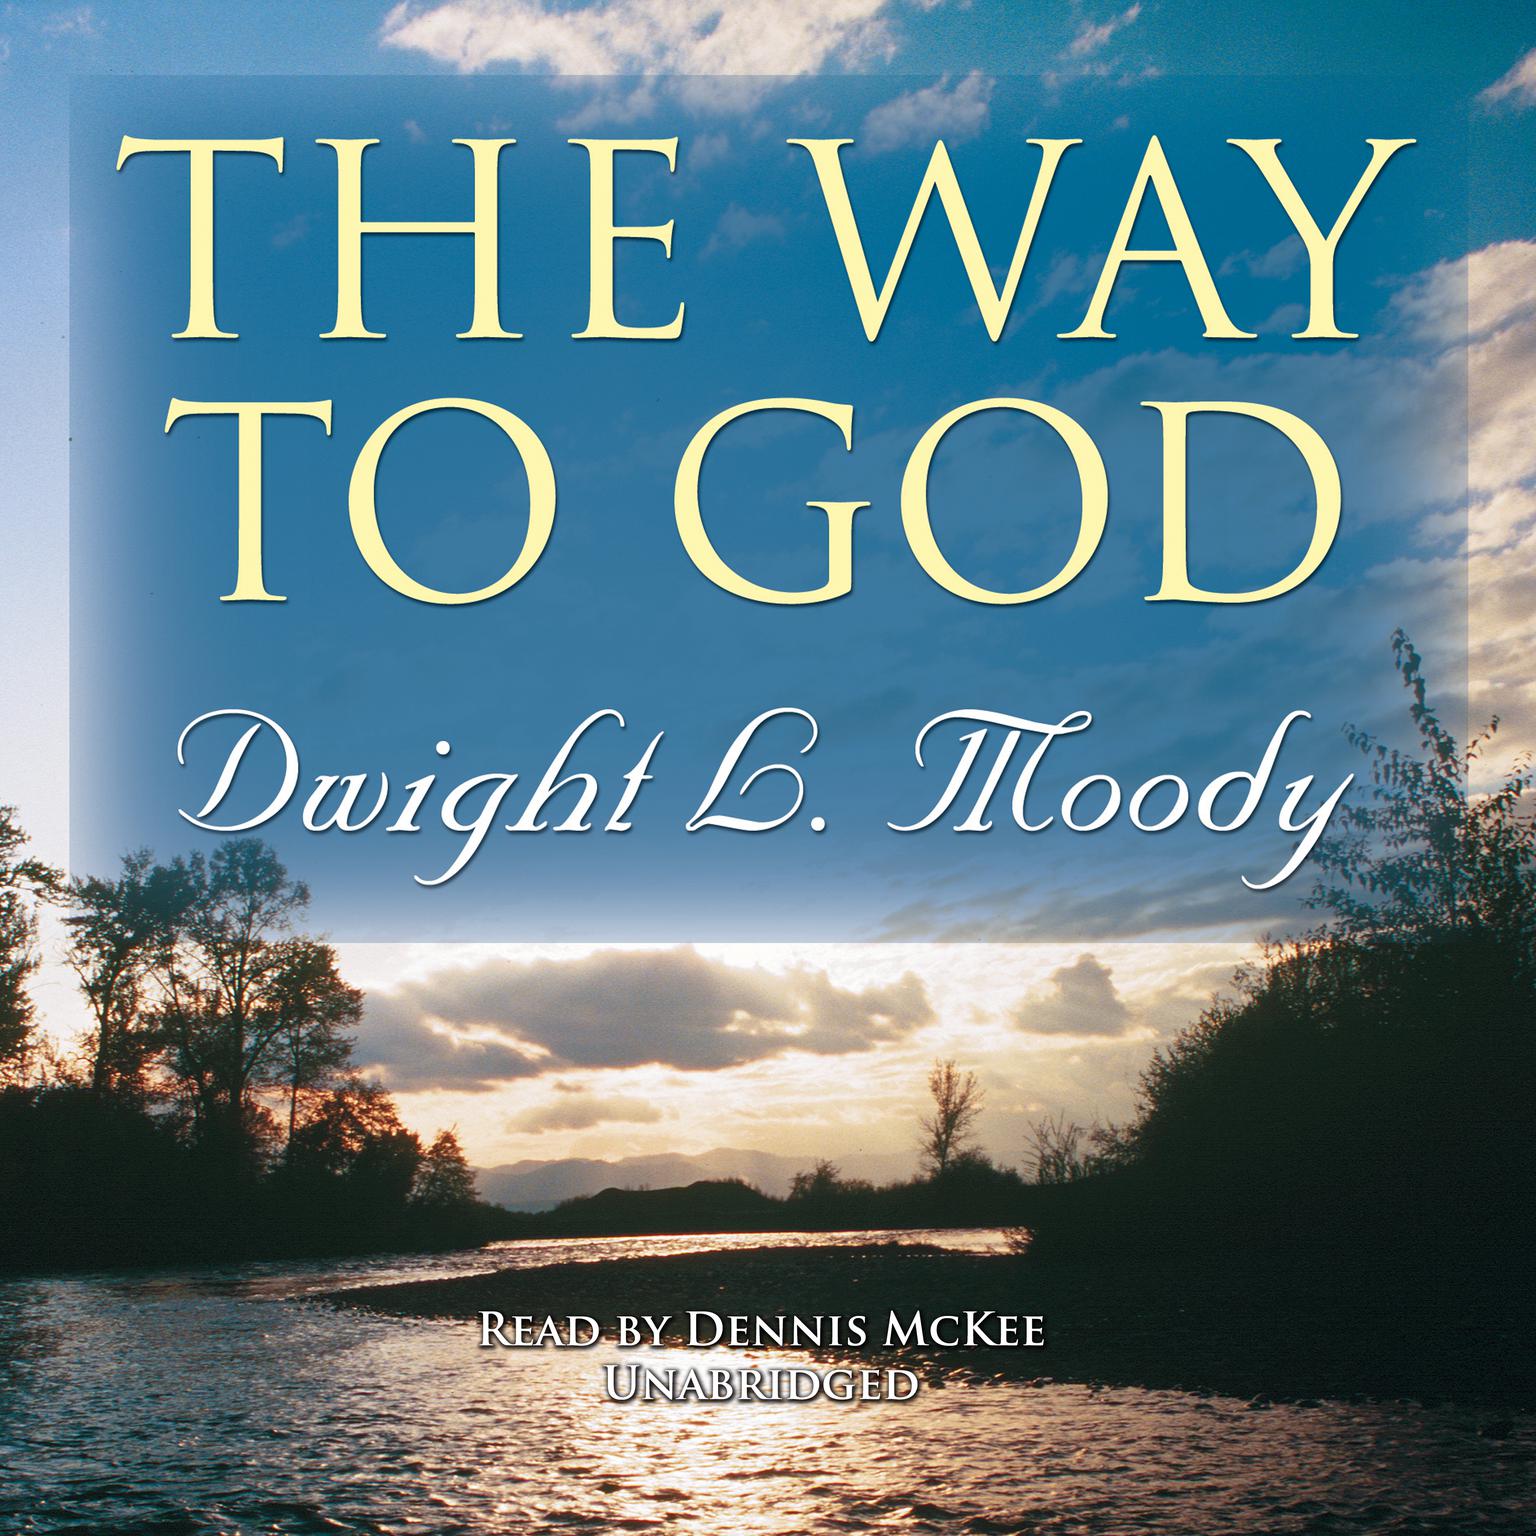 The Way to God Audiobook, by Dwight L. Moody